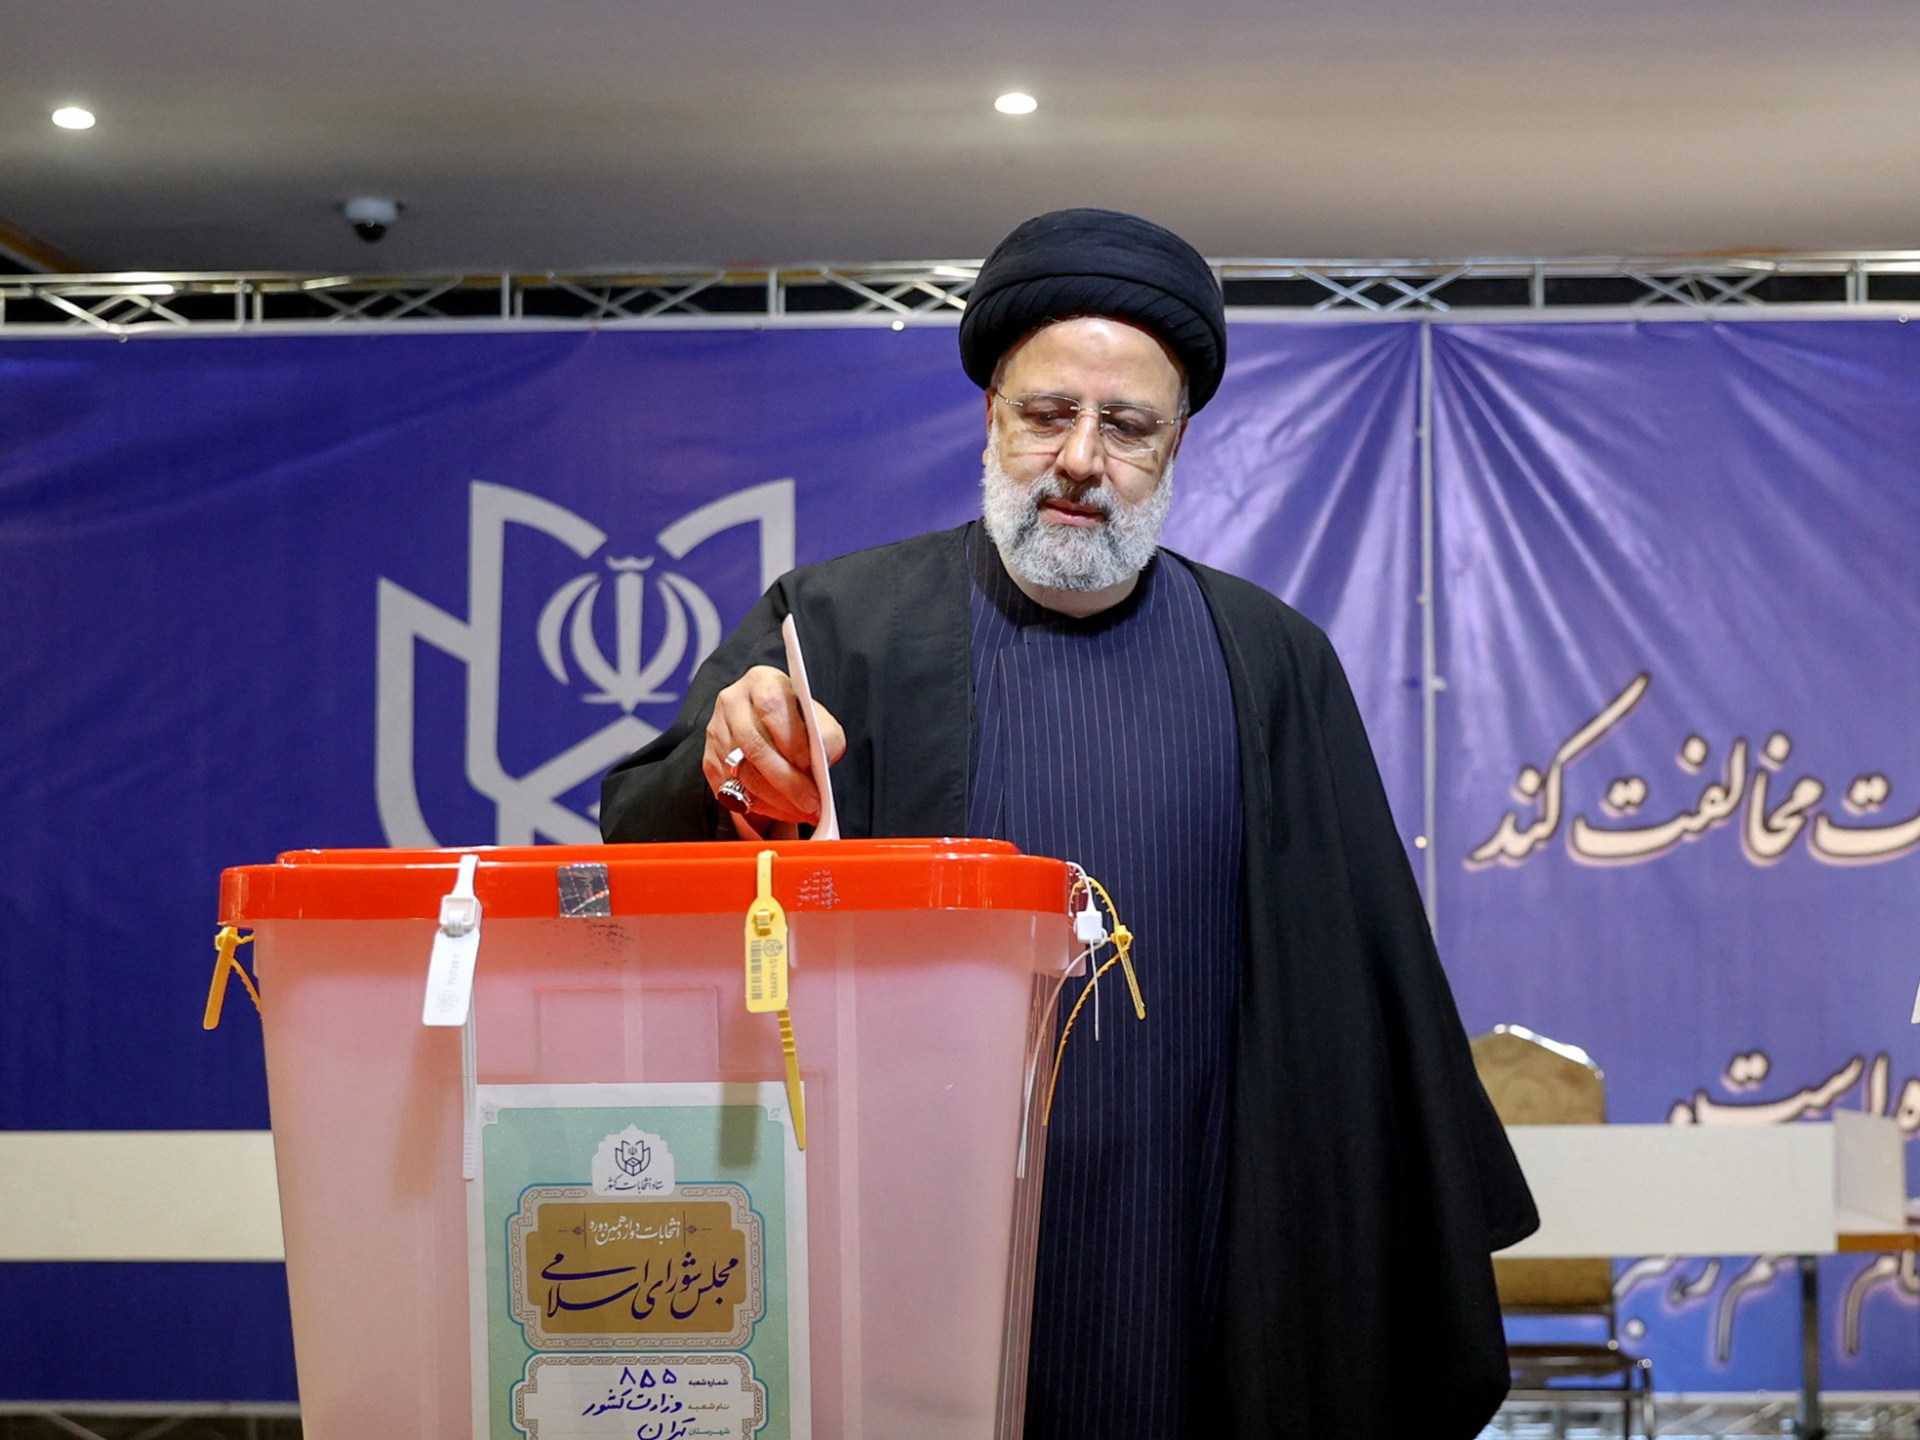 Conservatives dominate Iran’s parliament, assembly elections | Elections News